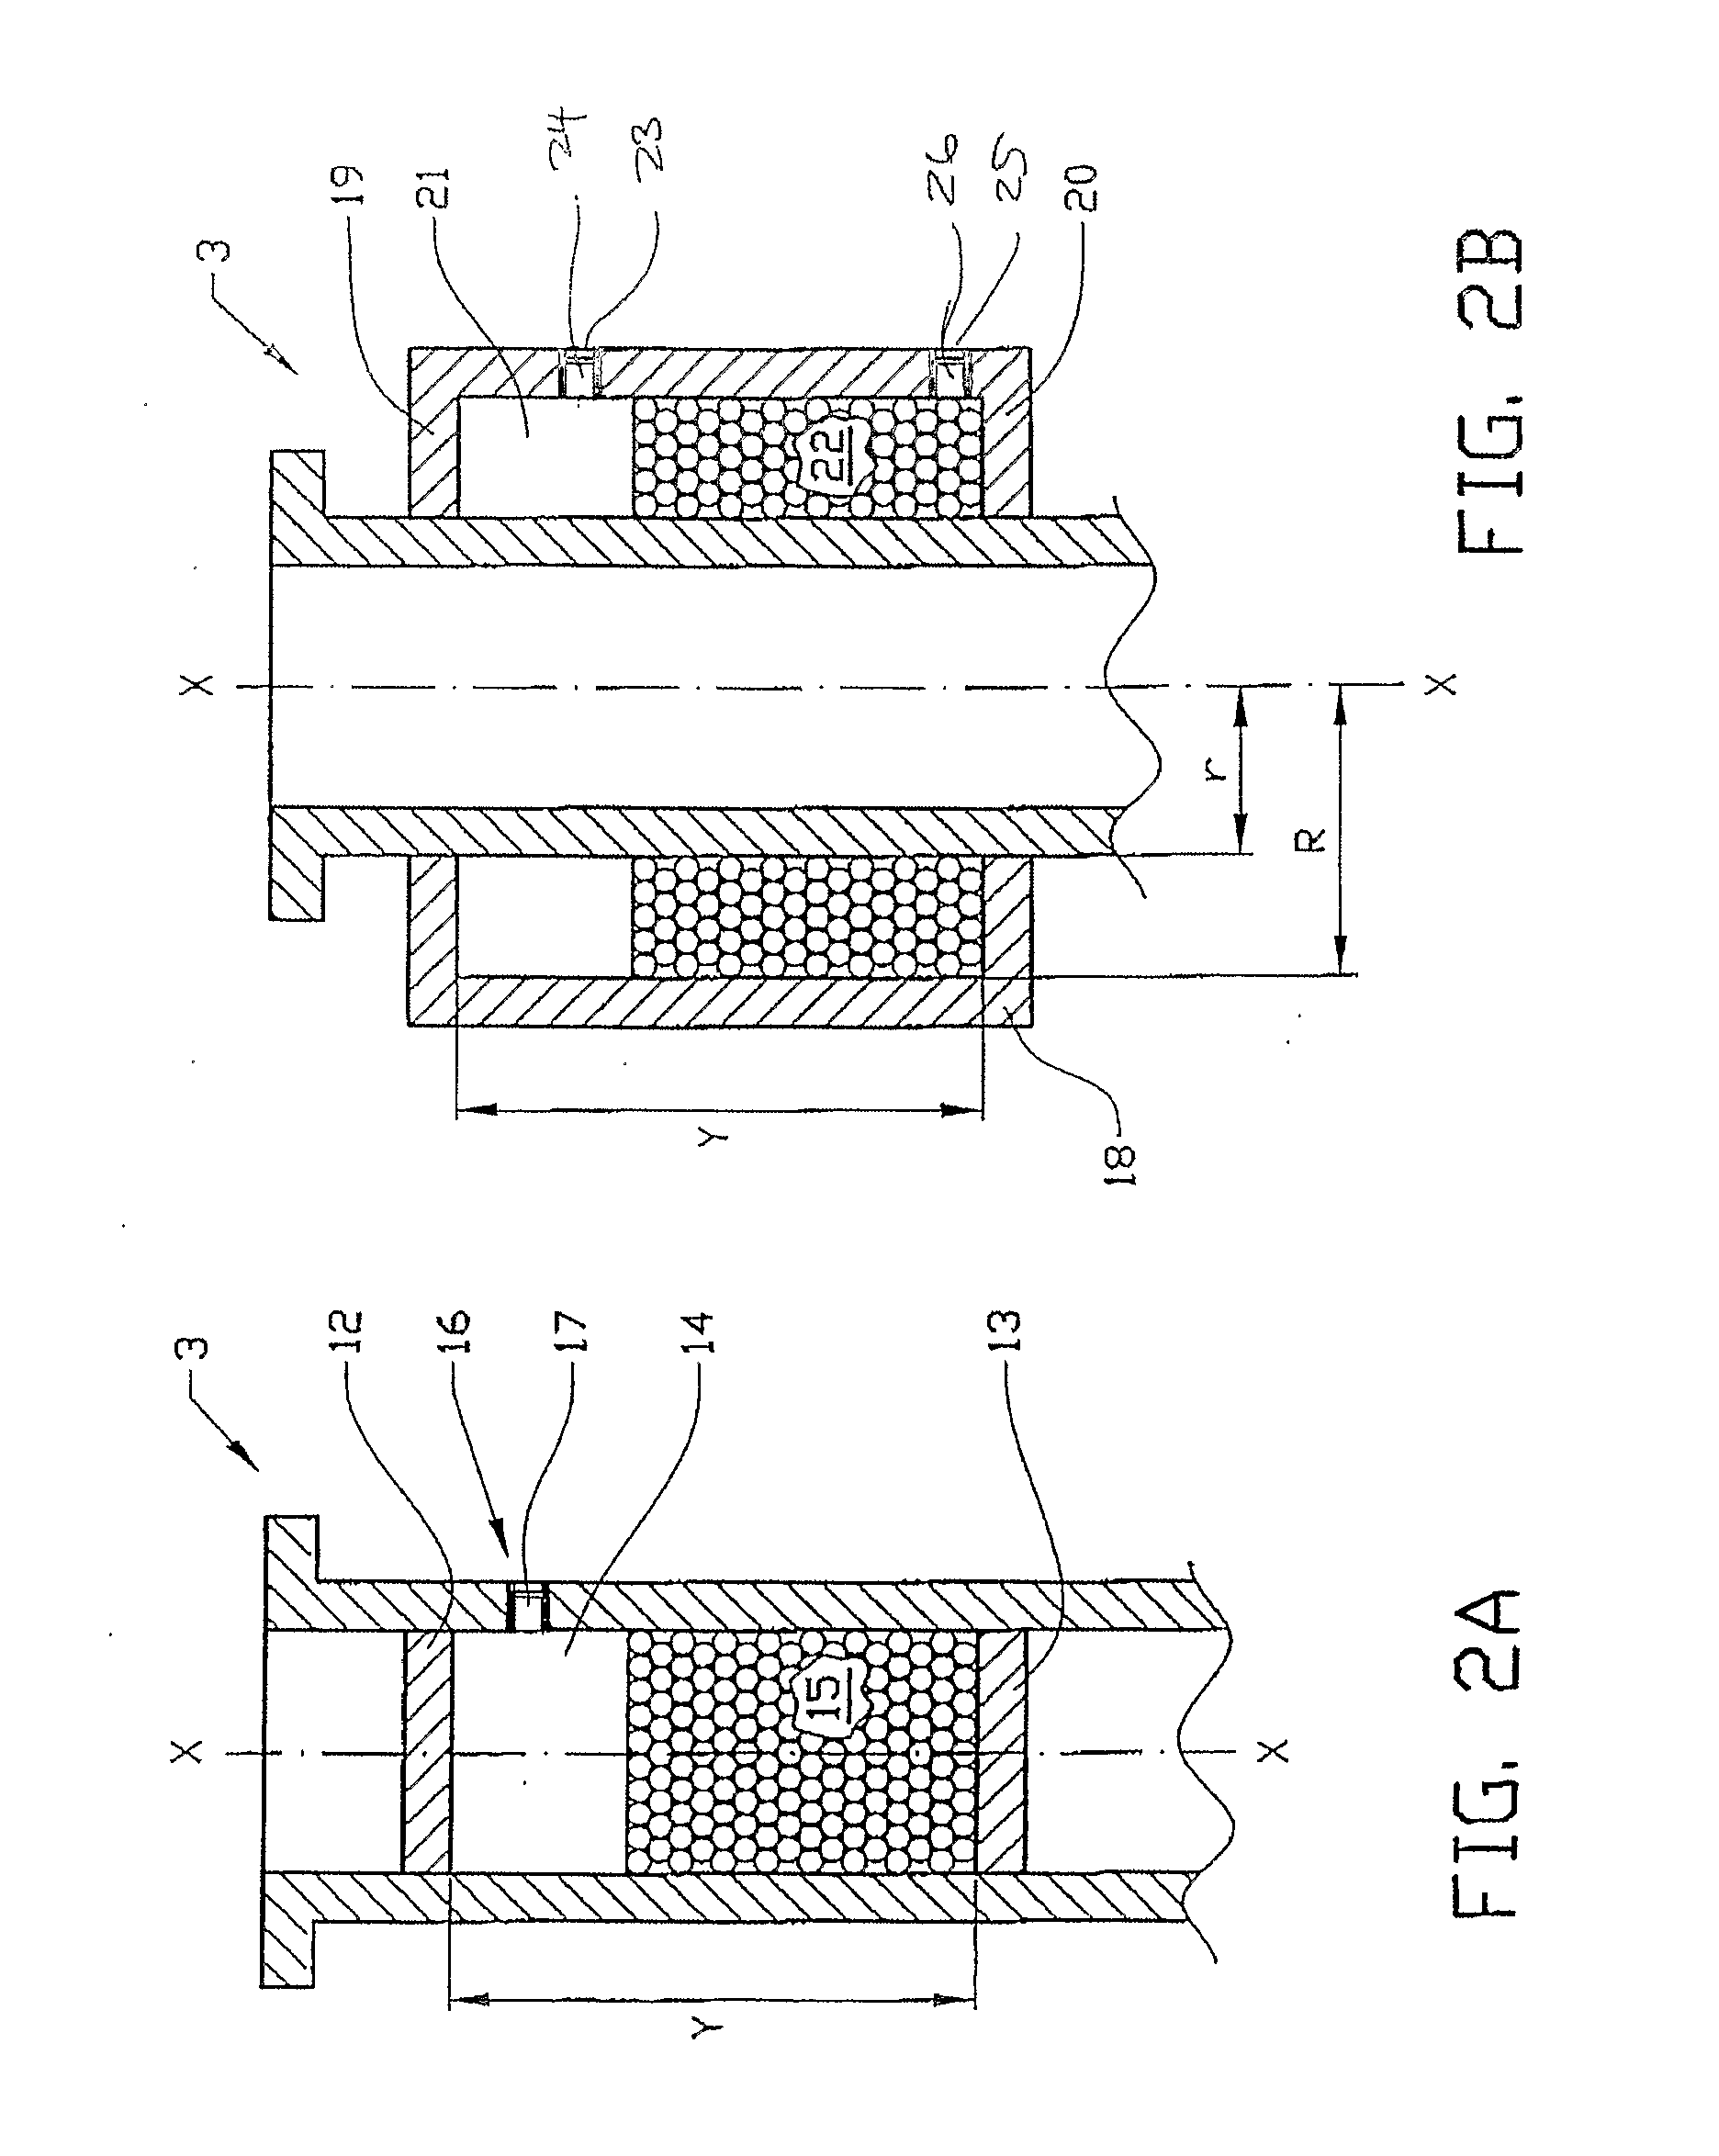 Arrangement for vibration damping in a steering column